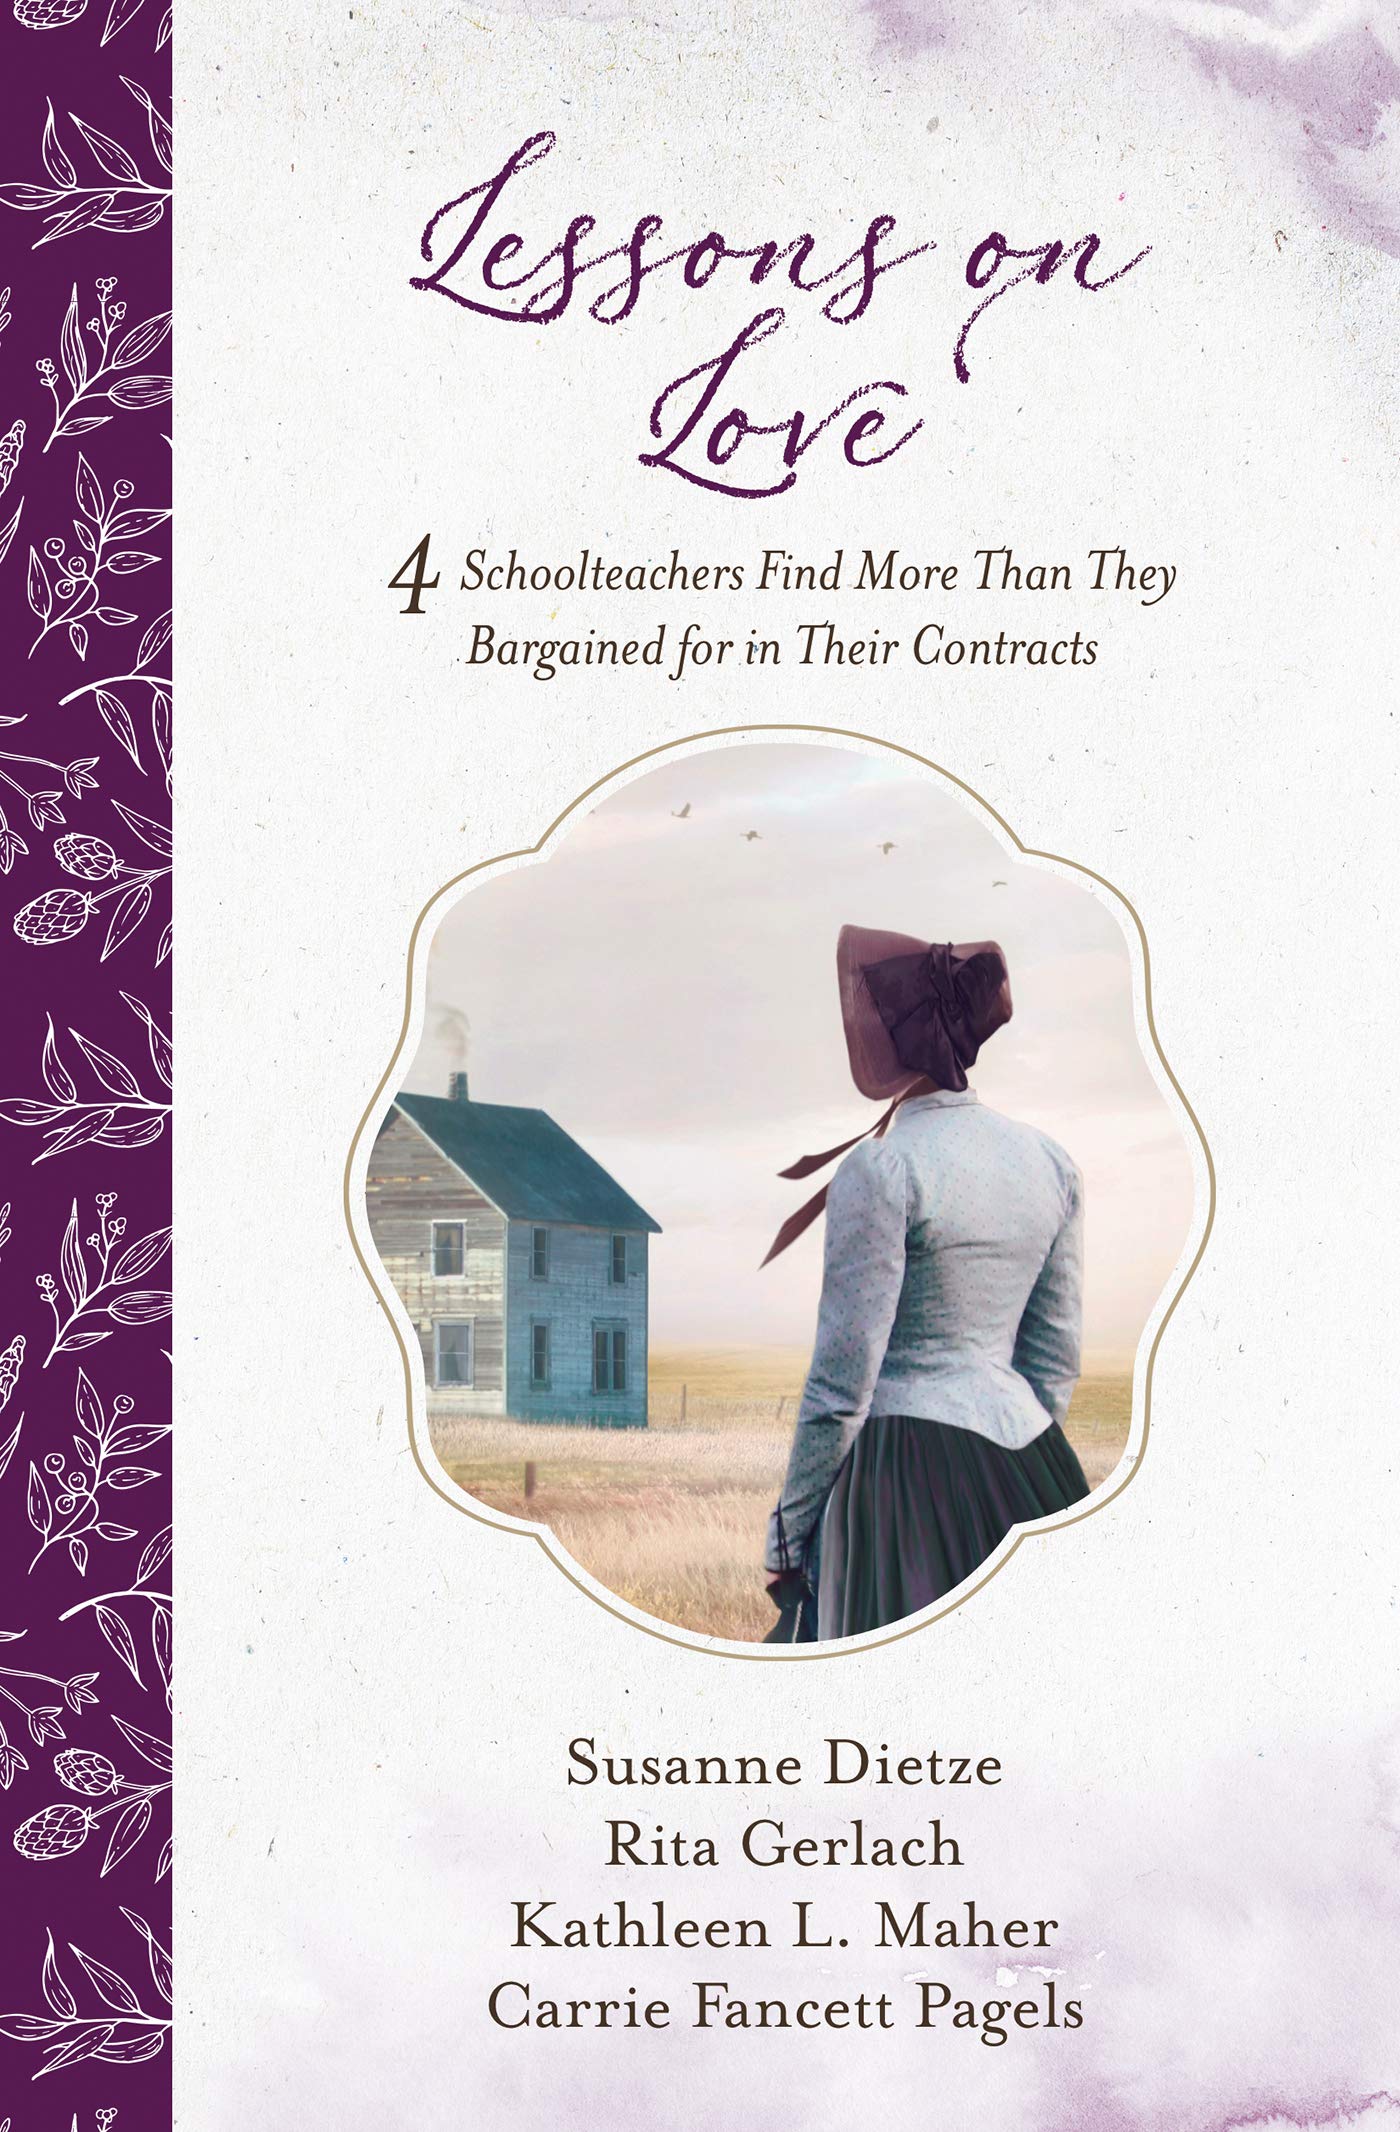 Lessons on Love: 4 Schoolteachers Find More Than They Bargained for in Their Contracts